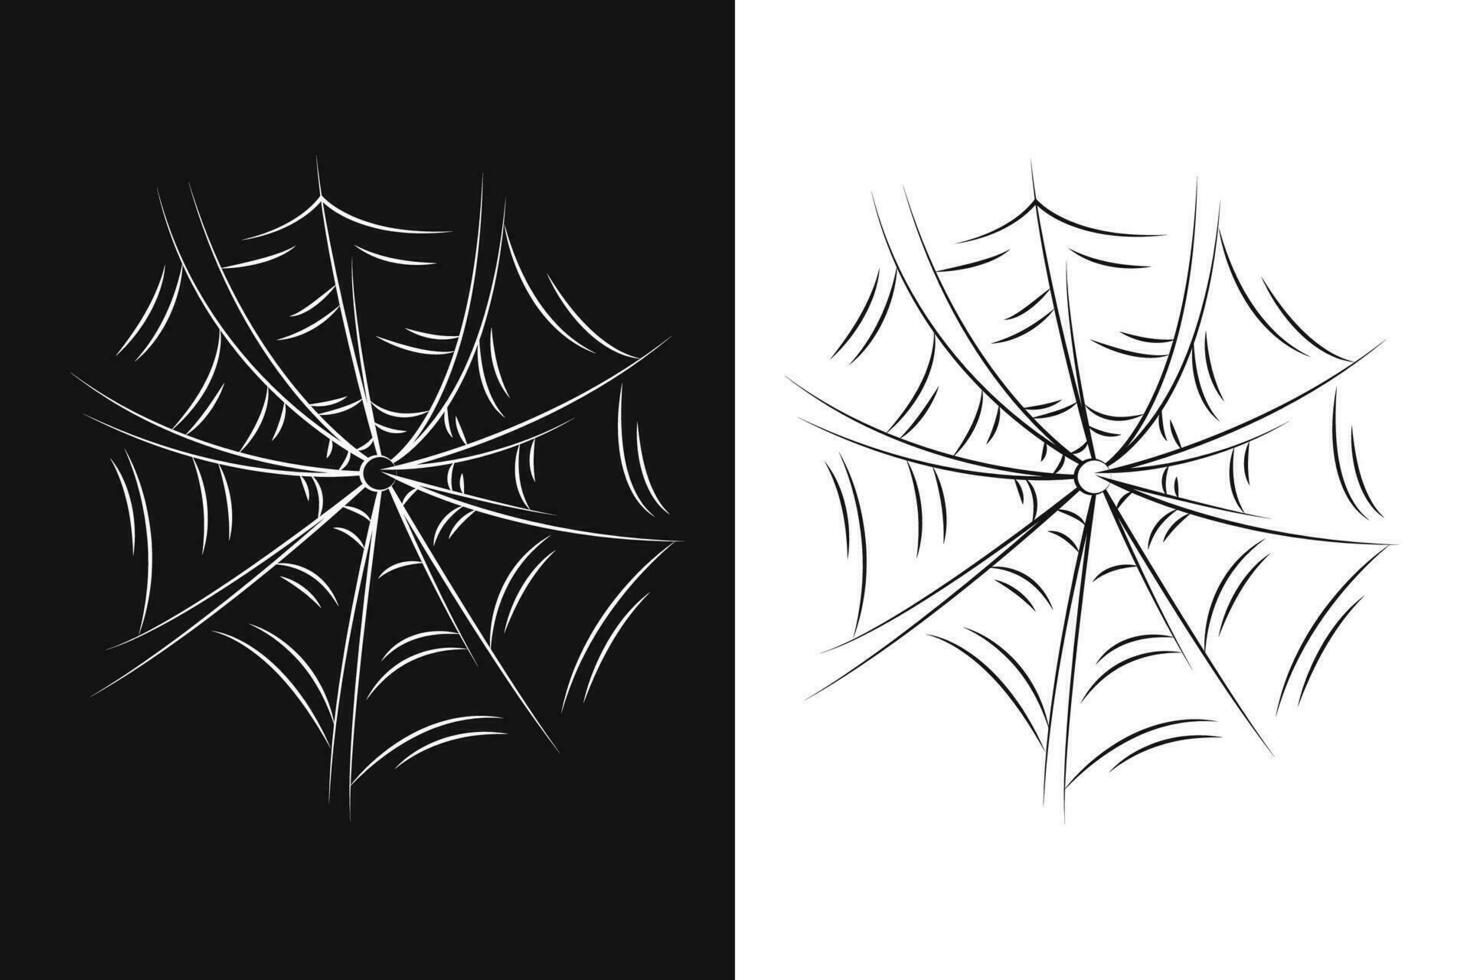 Scary spider web as a symbol of Halloween. Black and white doodle vector illustration.